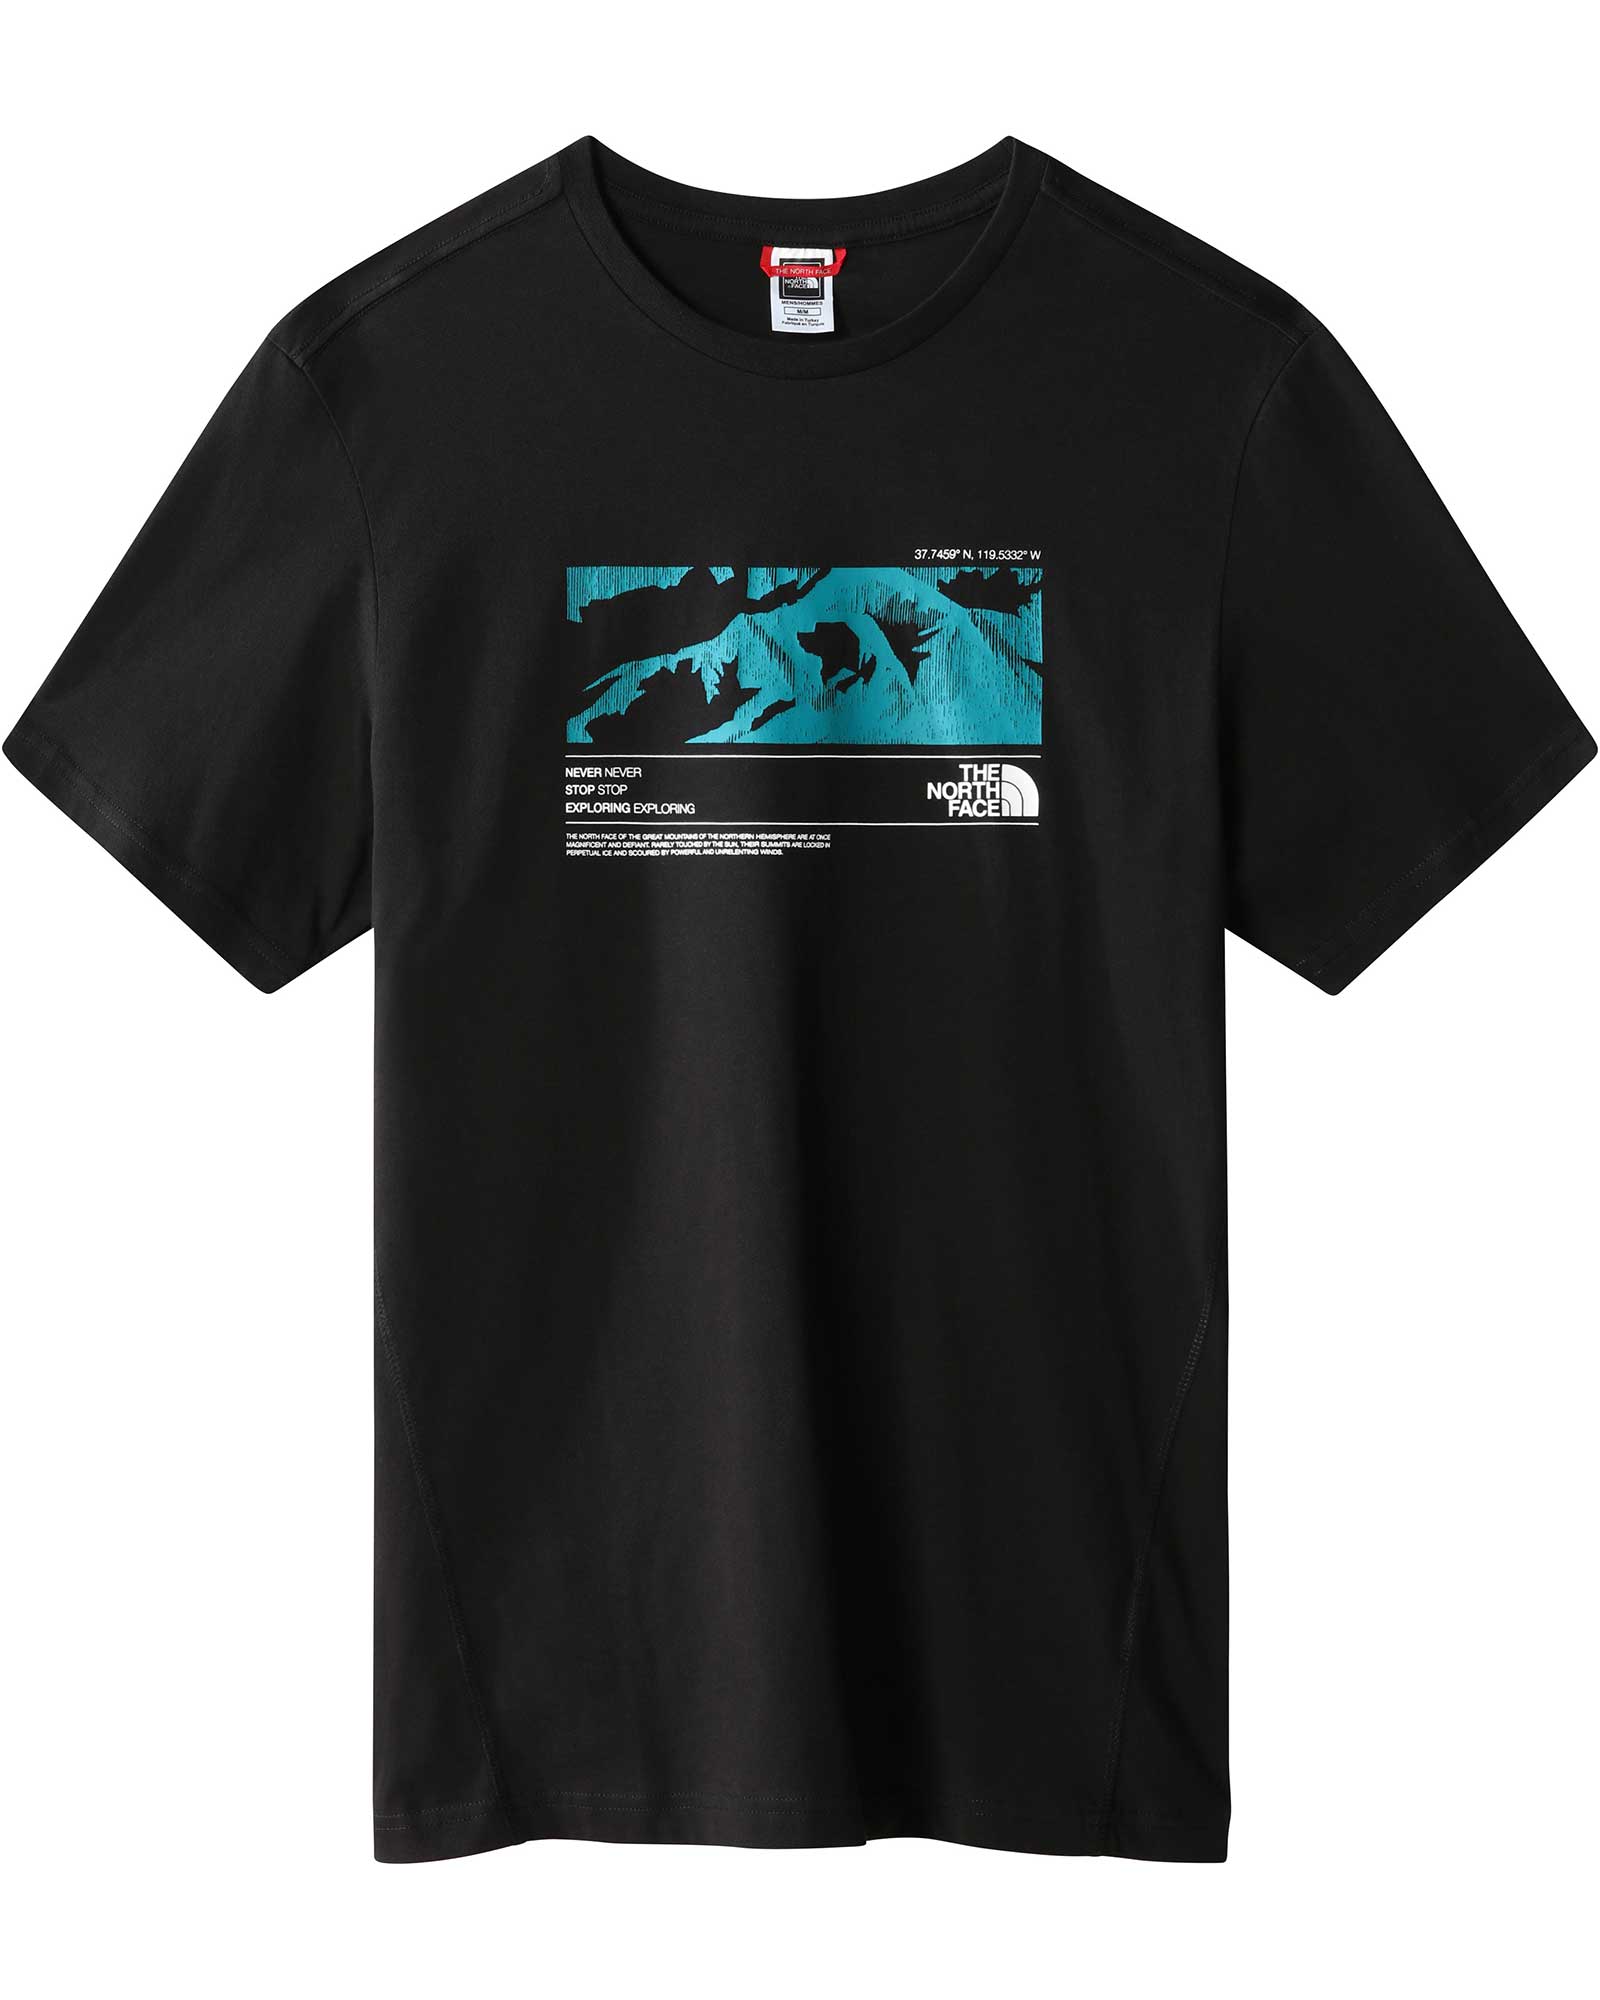 Product image of The North Face Coordinates 1 Men's T-Shirt